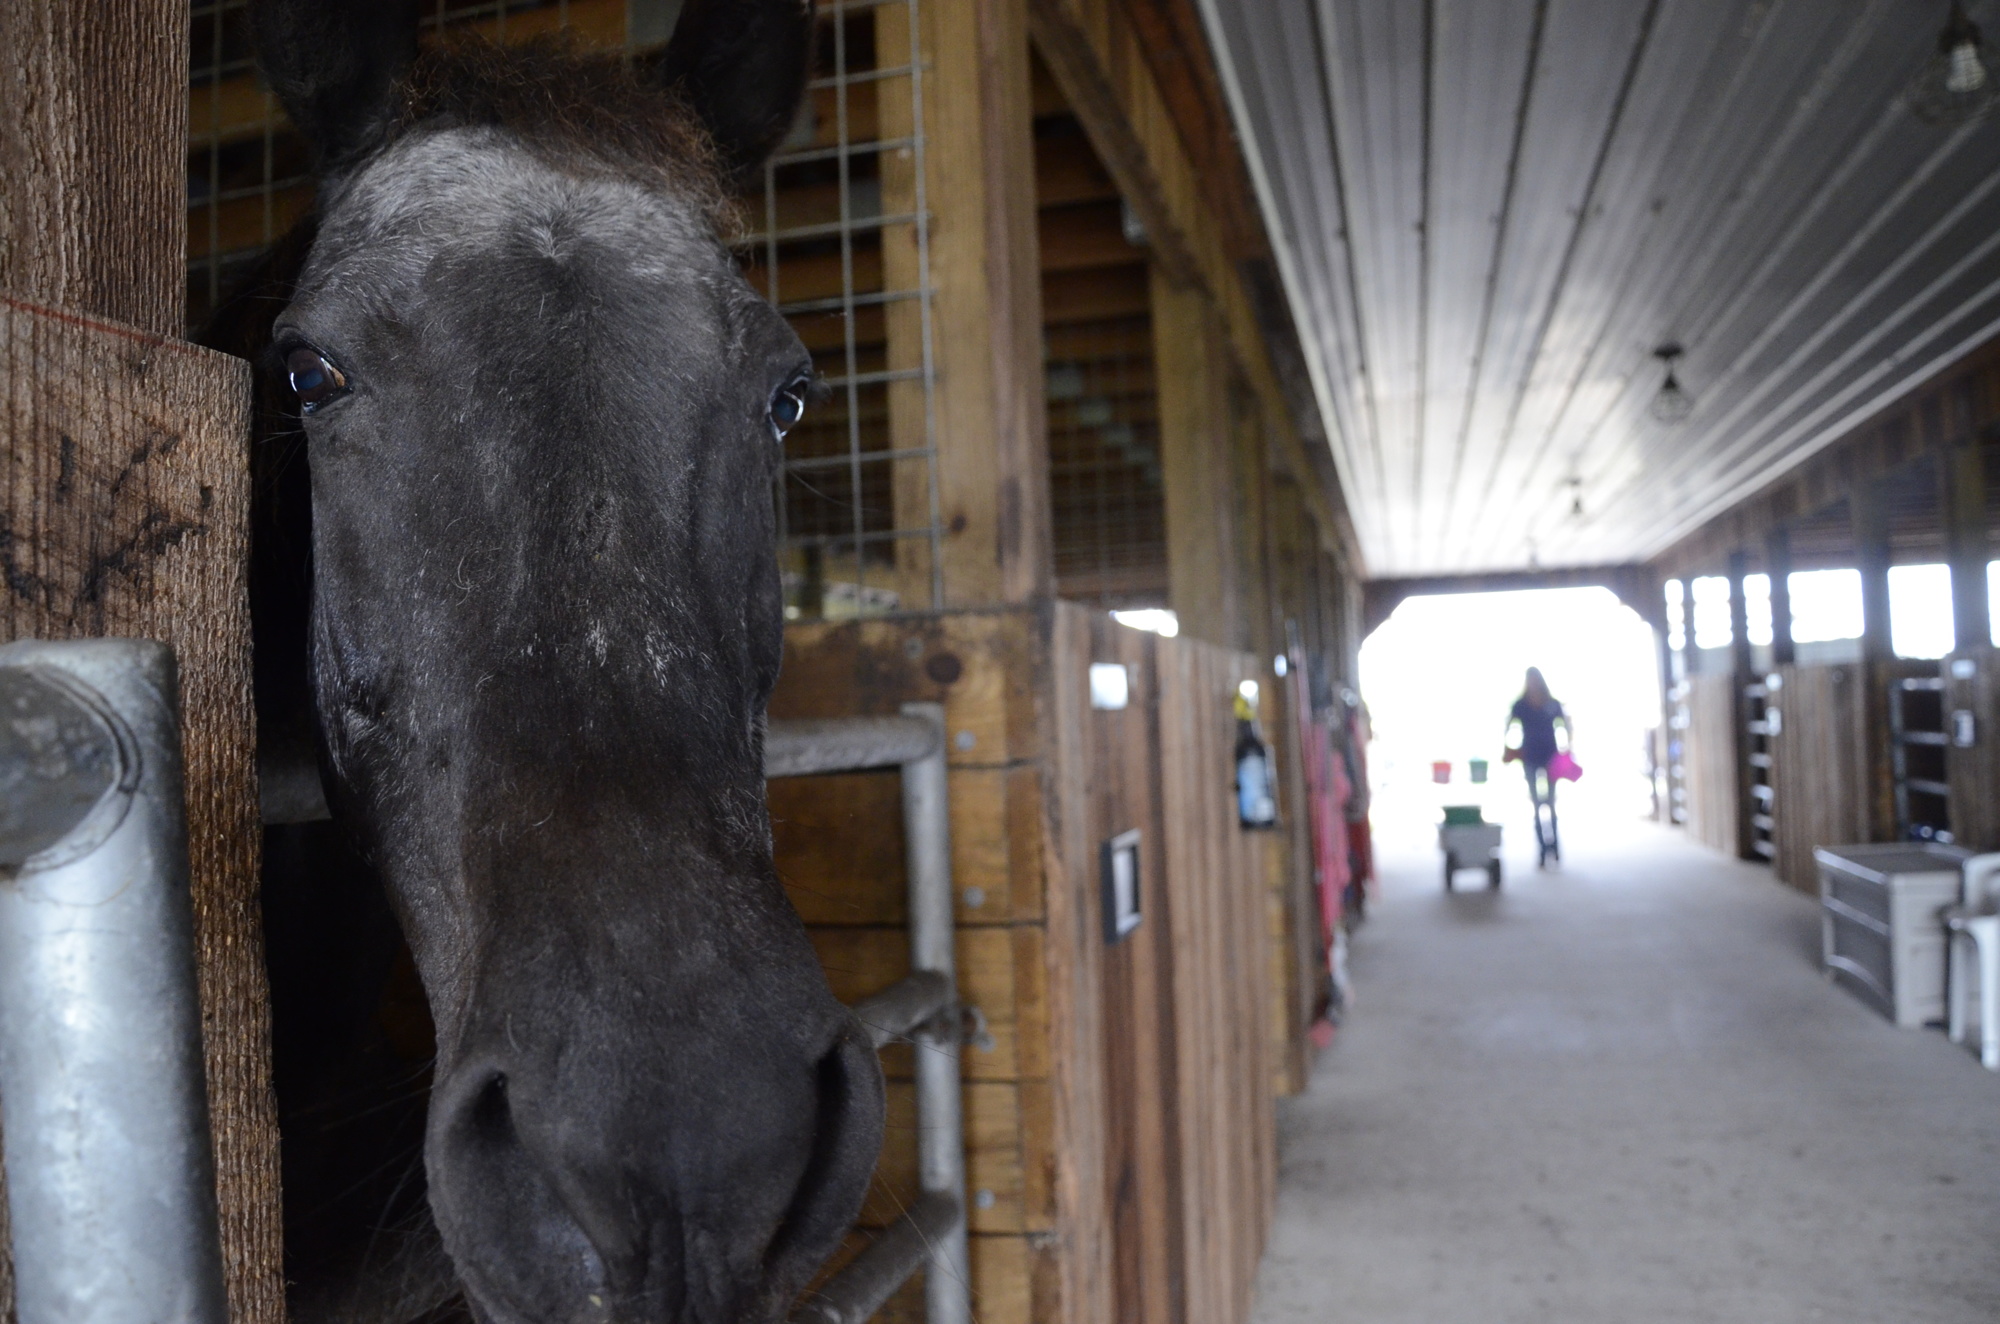 Bobbie hopes Robin Cain comes back with a cookie. Bobbie is one of the oldest horses at 16 Hands at age 30.